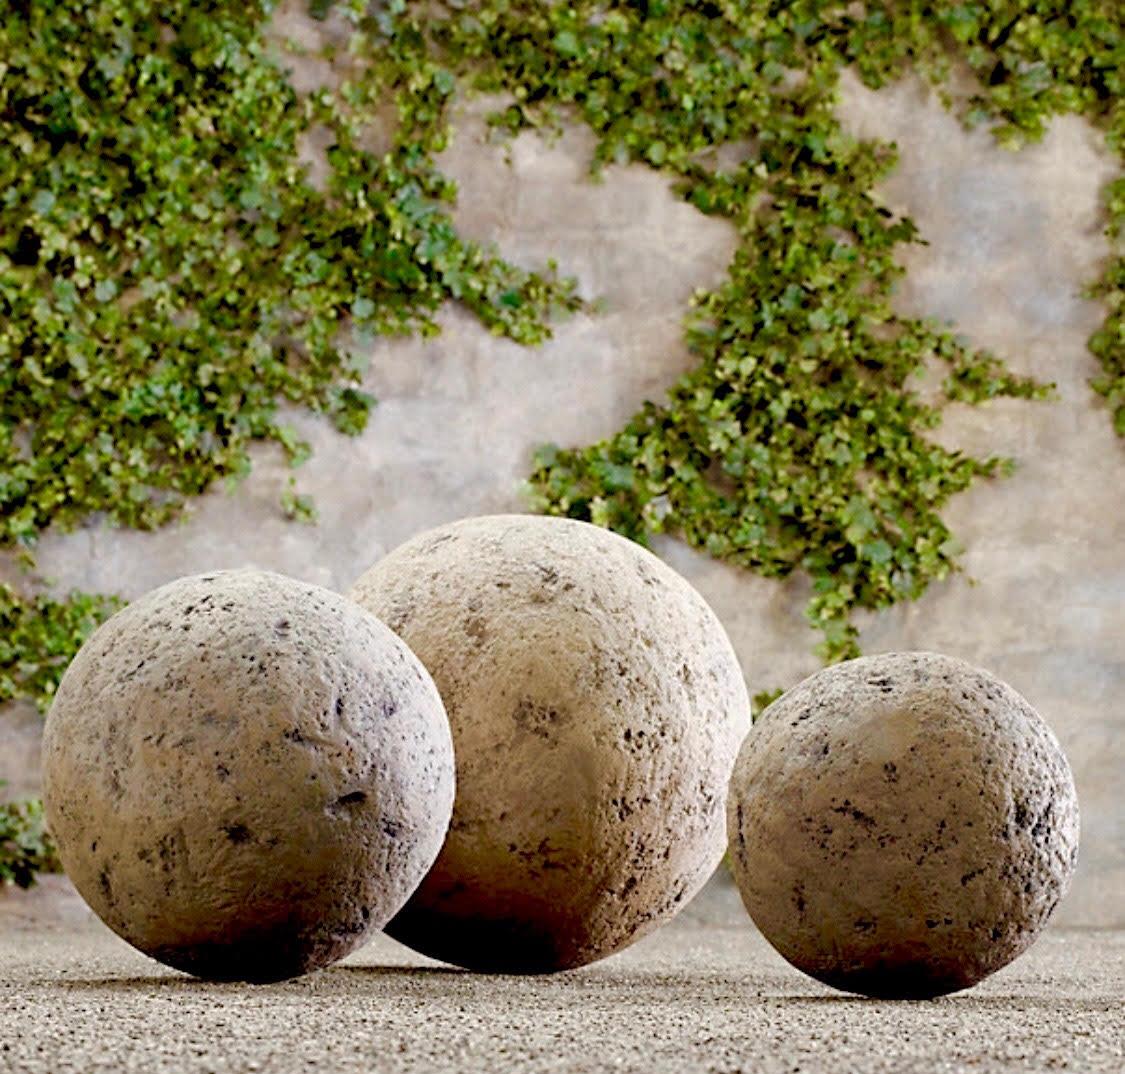 Resembling ancient catapult and canon balls these carved lava rock spheres are found in several sizes and can be used to accent your garden. Hand carved in the Mediterranean.